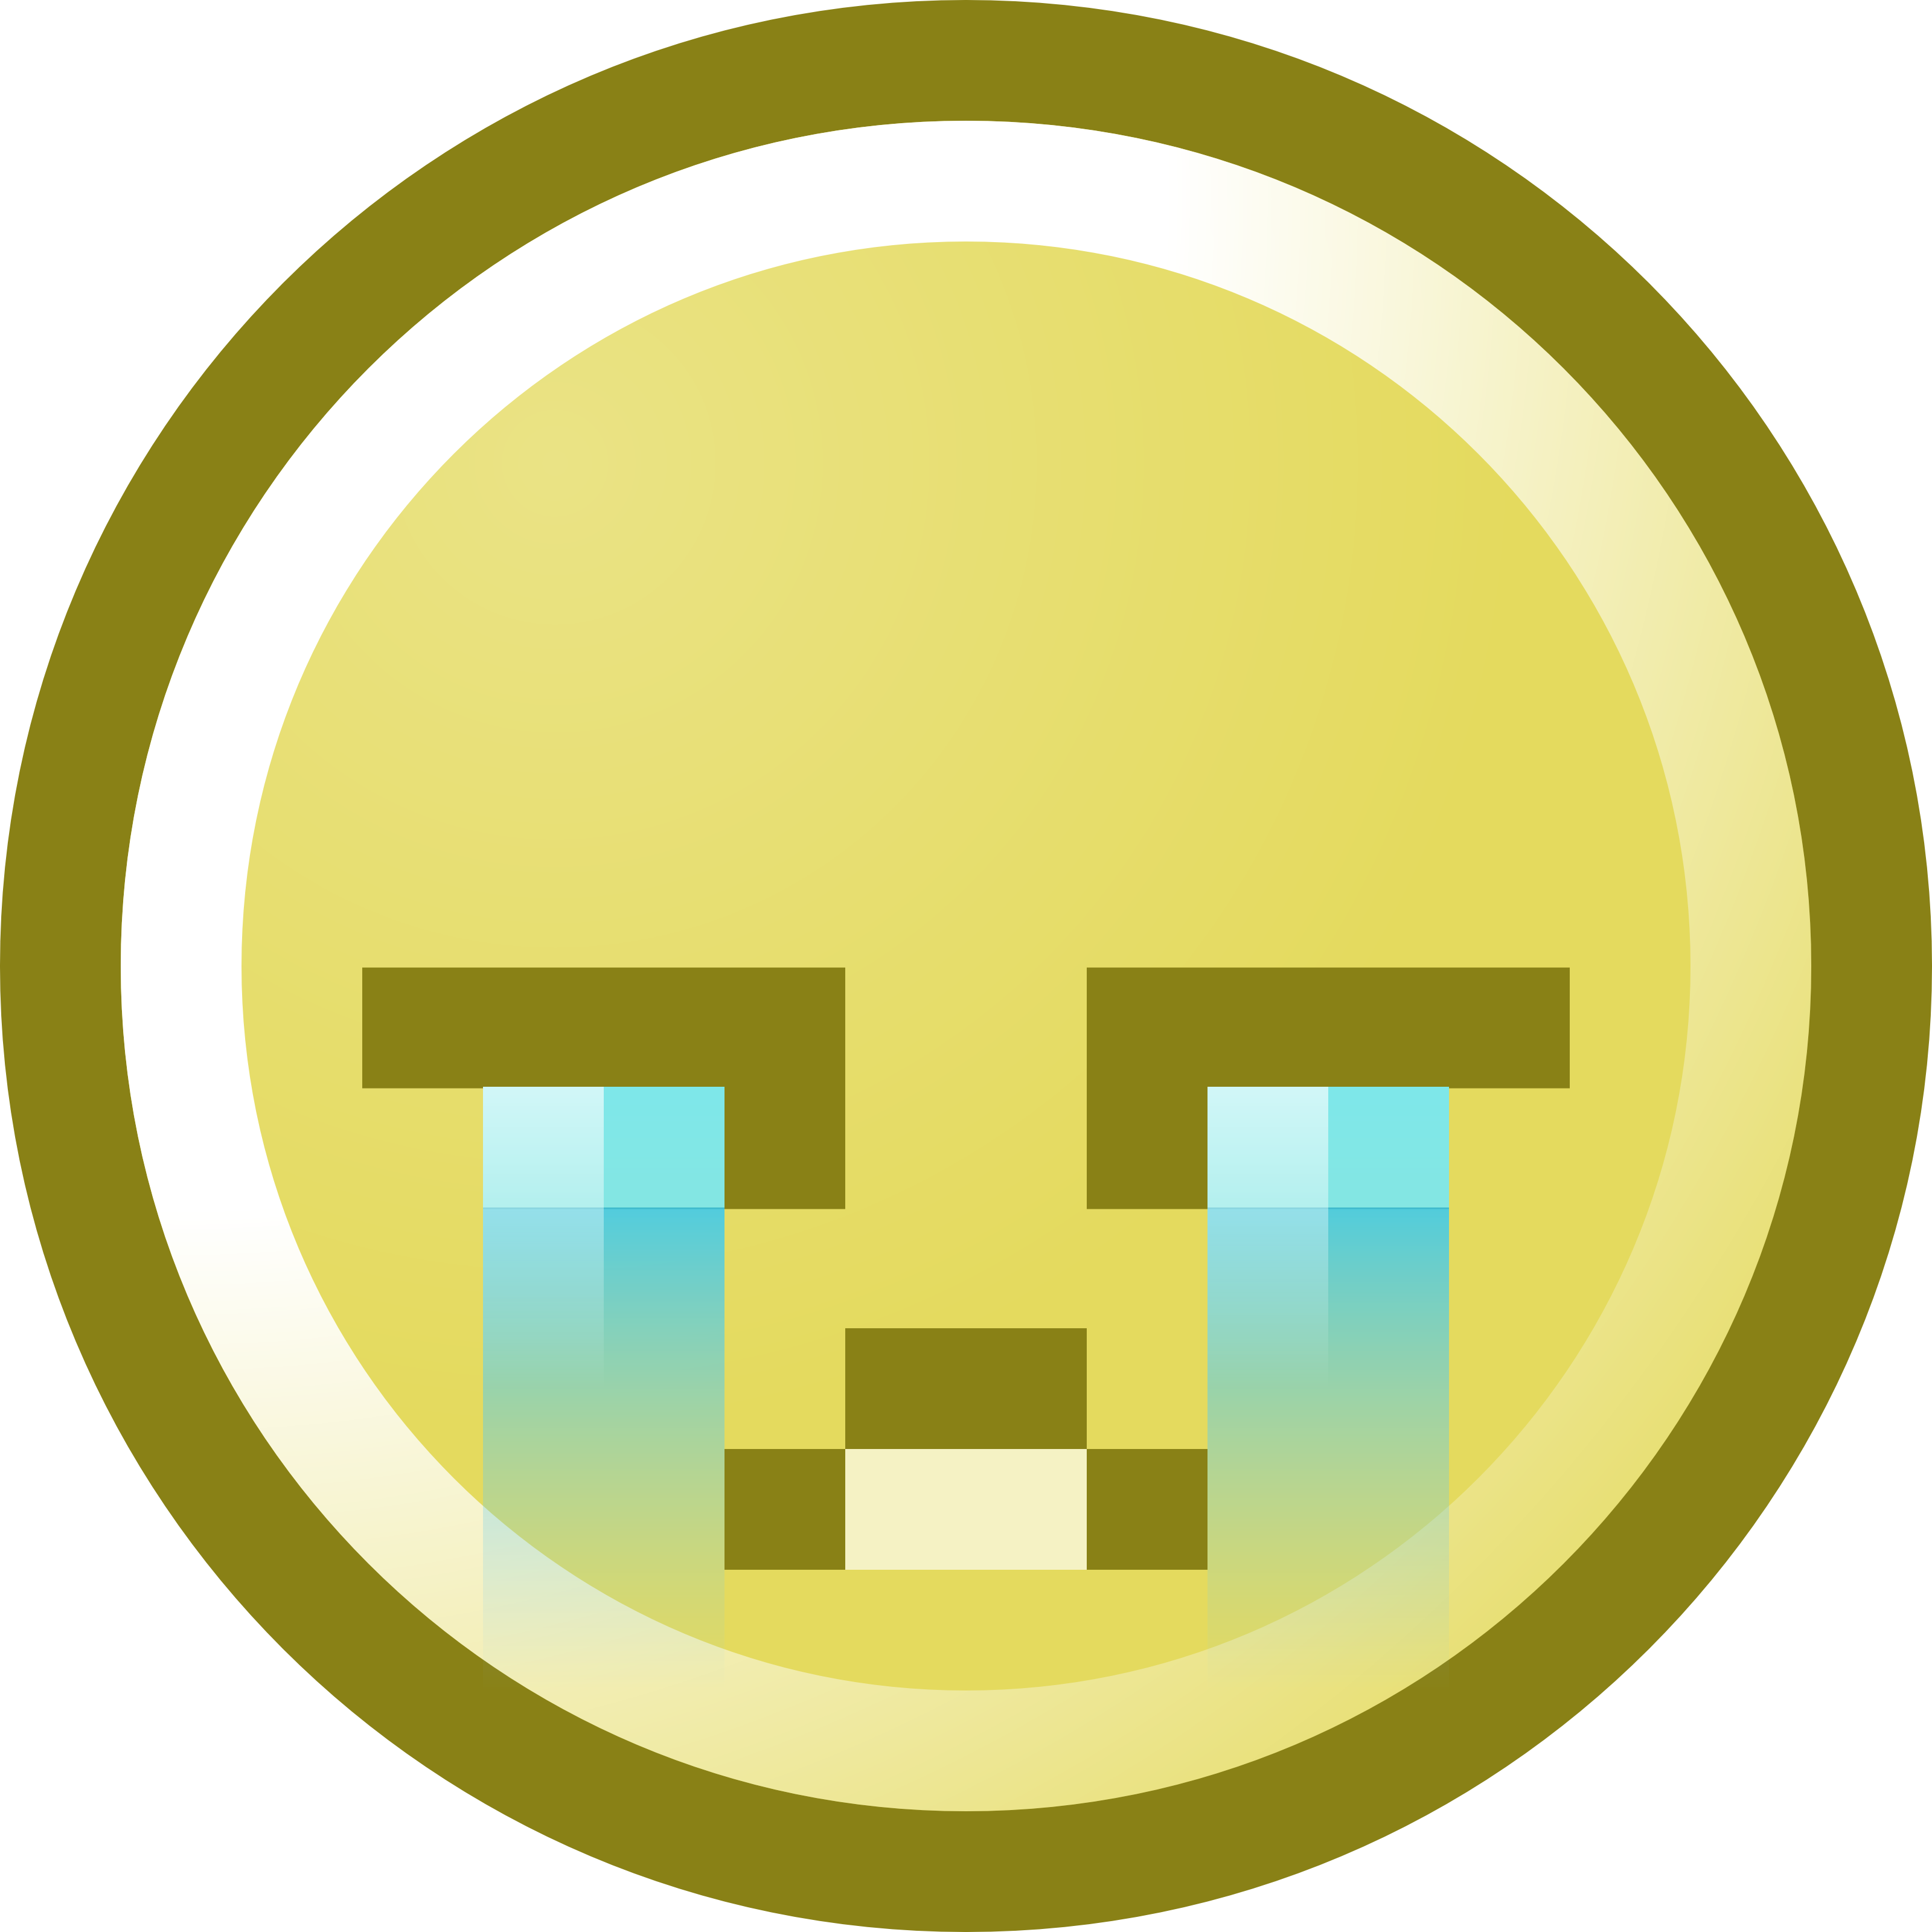 Free Crying Smiley Face Clip Art Illustration By 000128